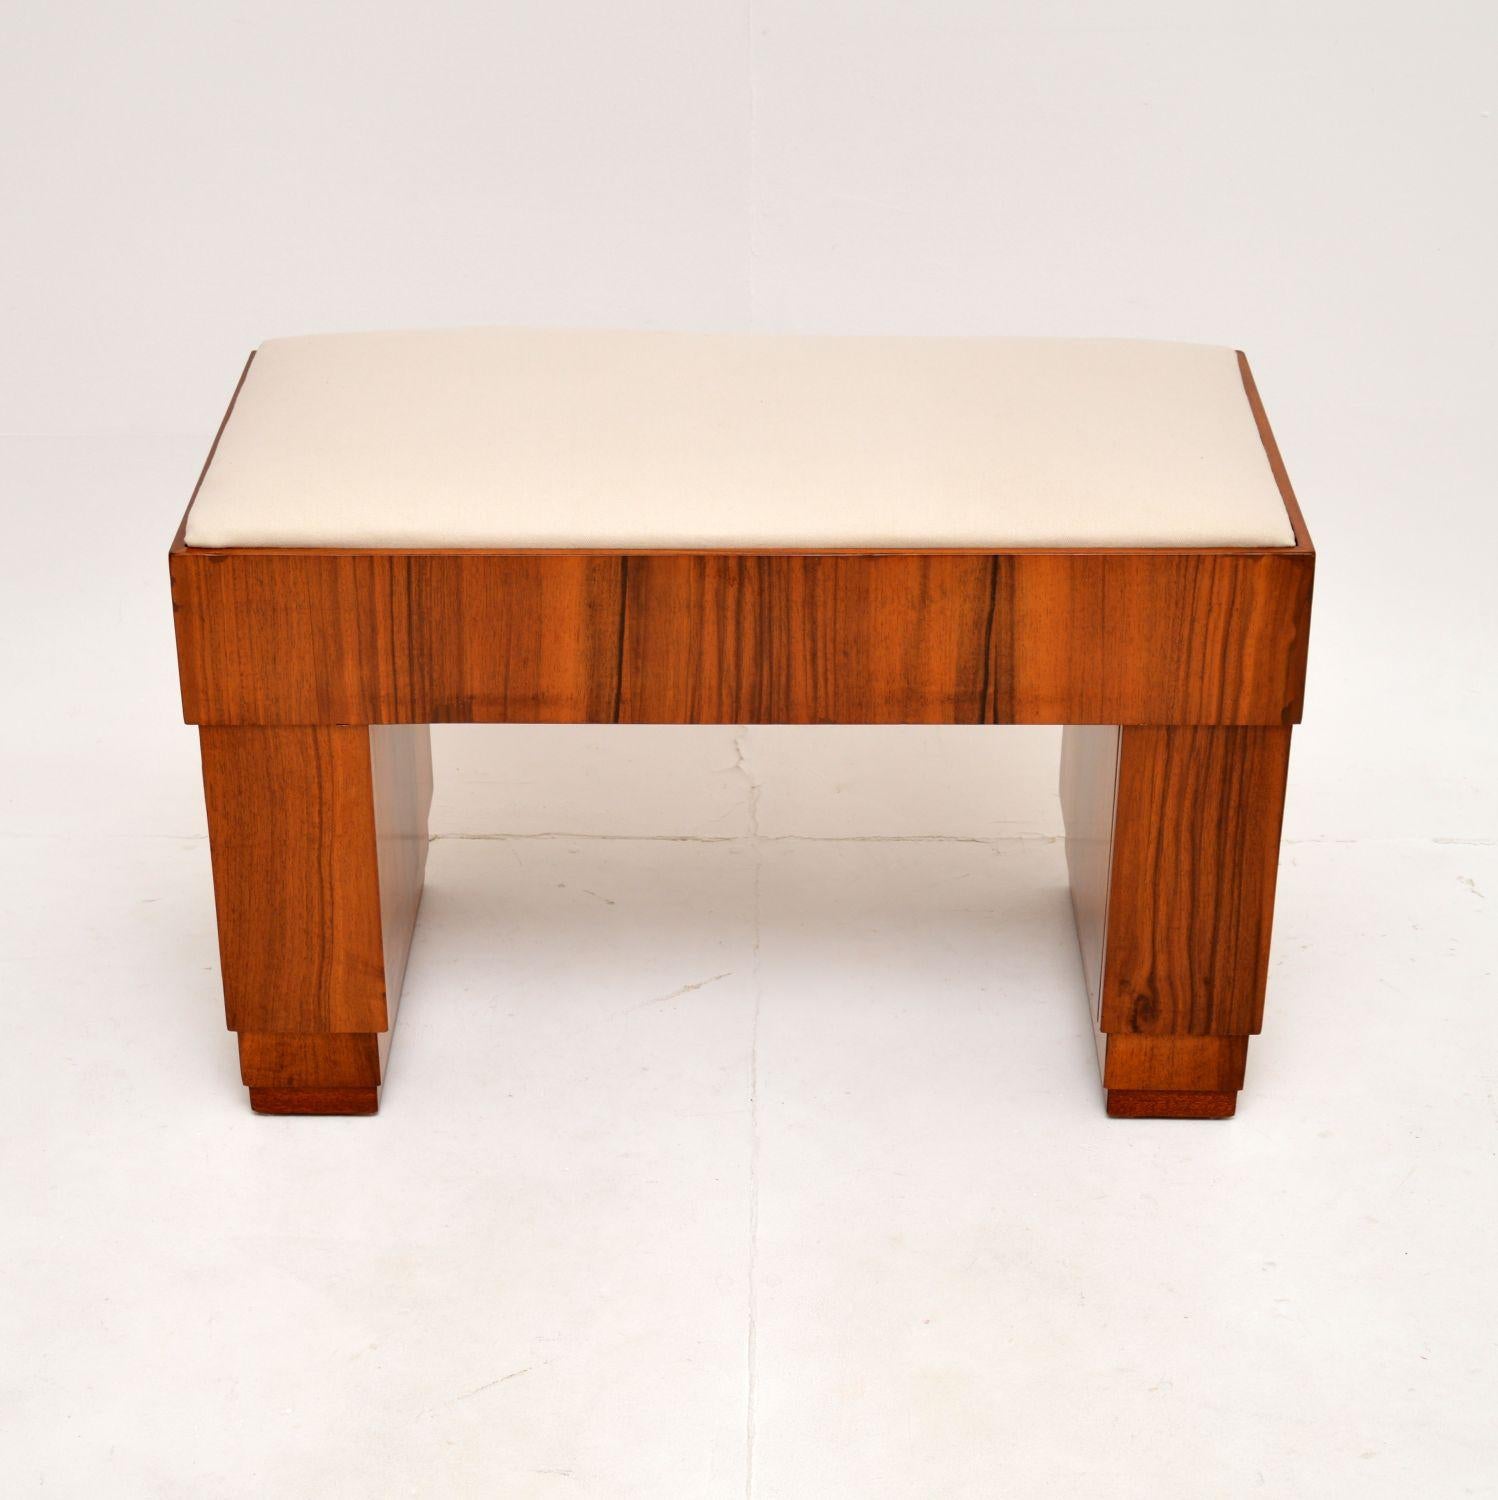 A beautiful and quite unusual Art Deco figured walnut duet piano stool. This was made in England, it dates from the 1920-30’s.

The quality is superb, this has a stylish and very functional design. The walnut frame has a twin pedestal base, each